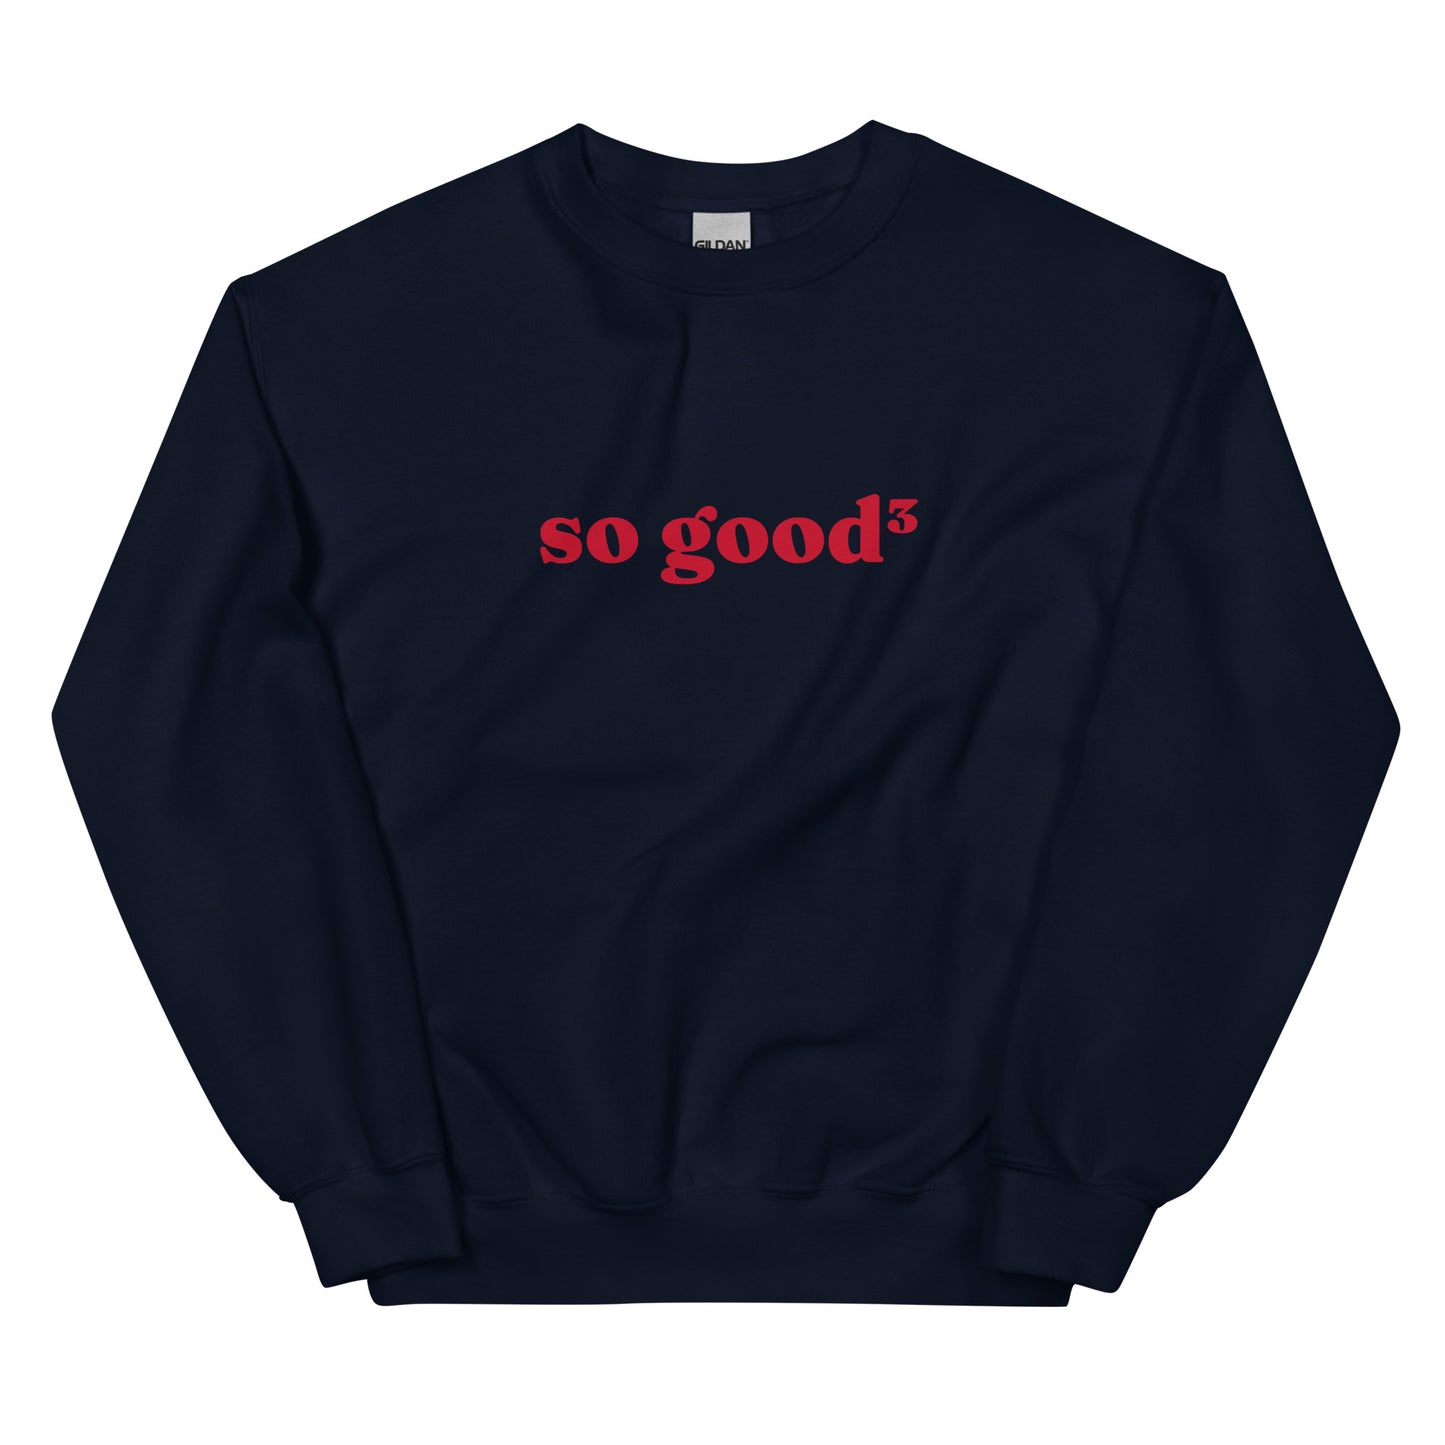 navy crewneck that says "so good cubed" in red lettering